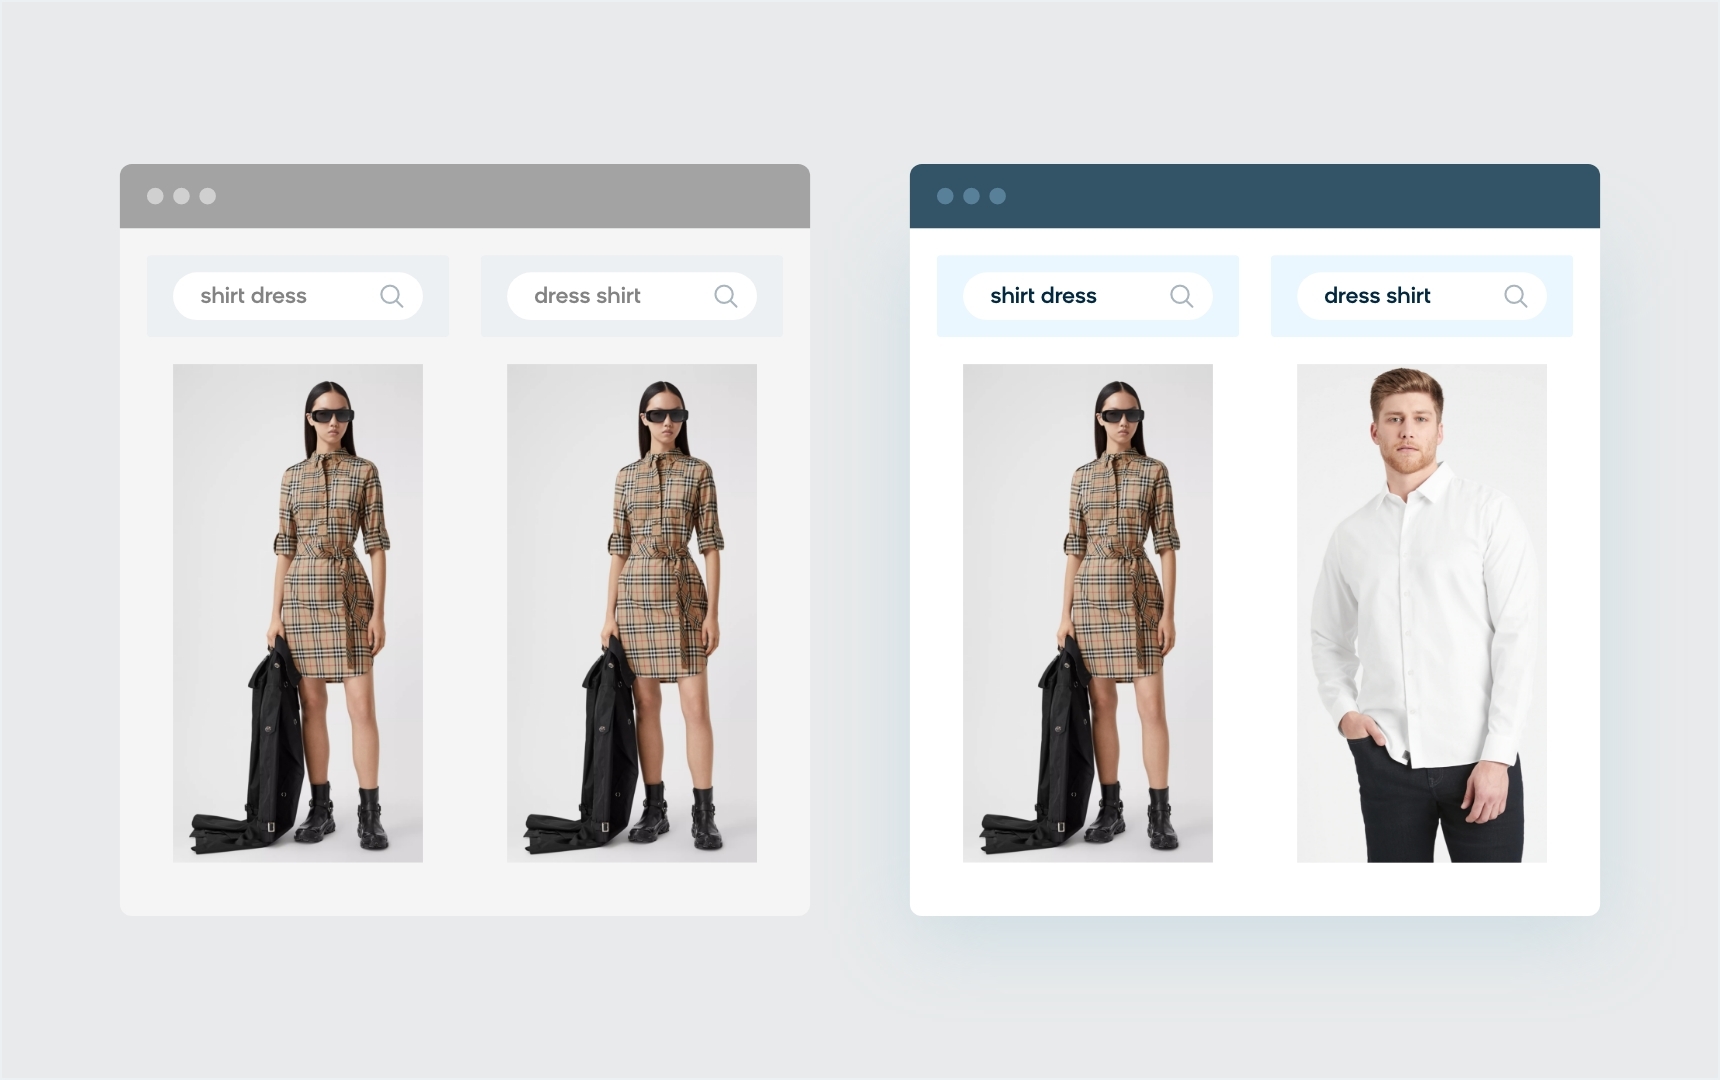 AI-powered search knowing the difference between shirt dress and dress shirt